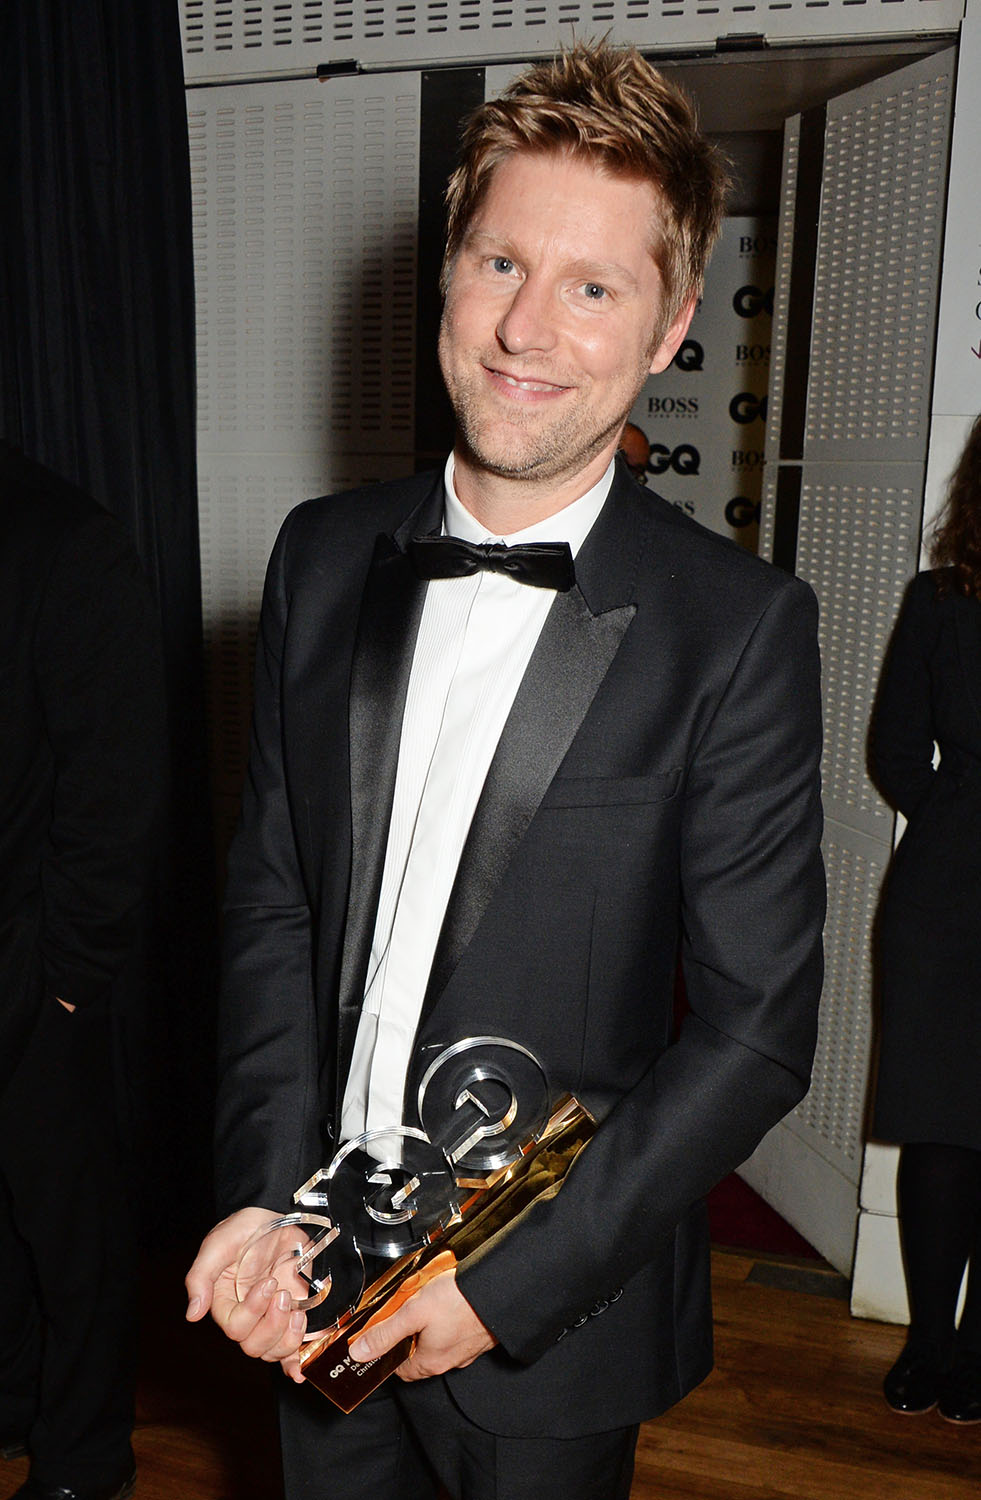 Christopher_Bailey_at_the_17th_Annual_British_GQ_Men_of_the_Year_Awards_in_London_(2_September_2014).jpeg.jpg